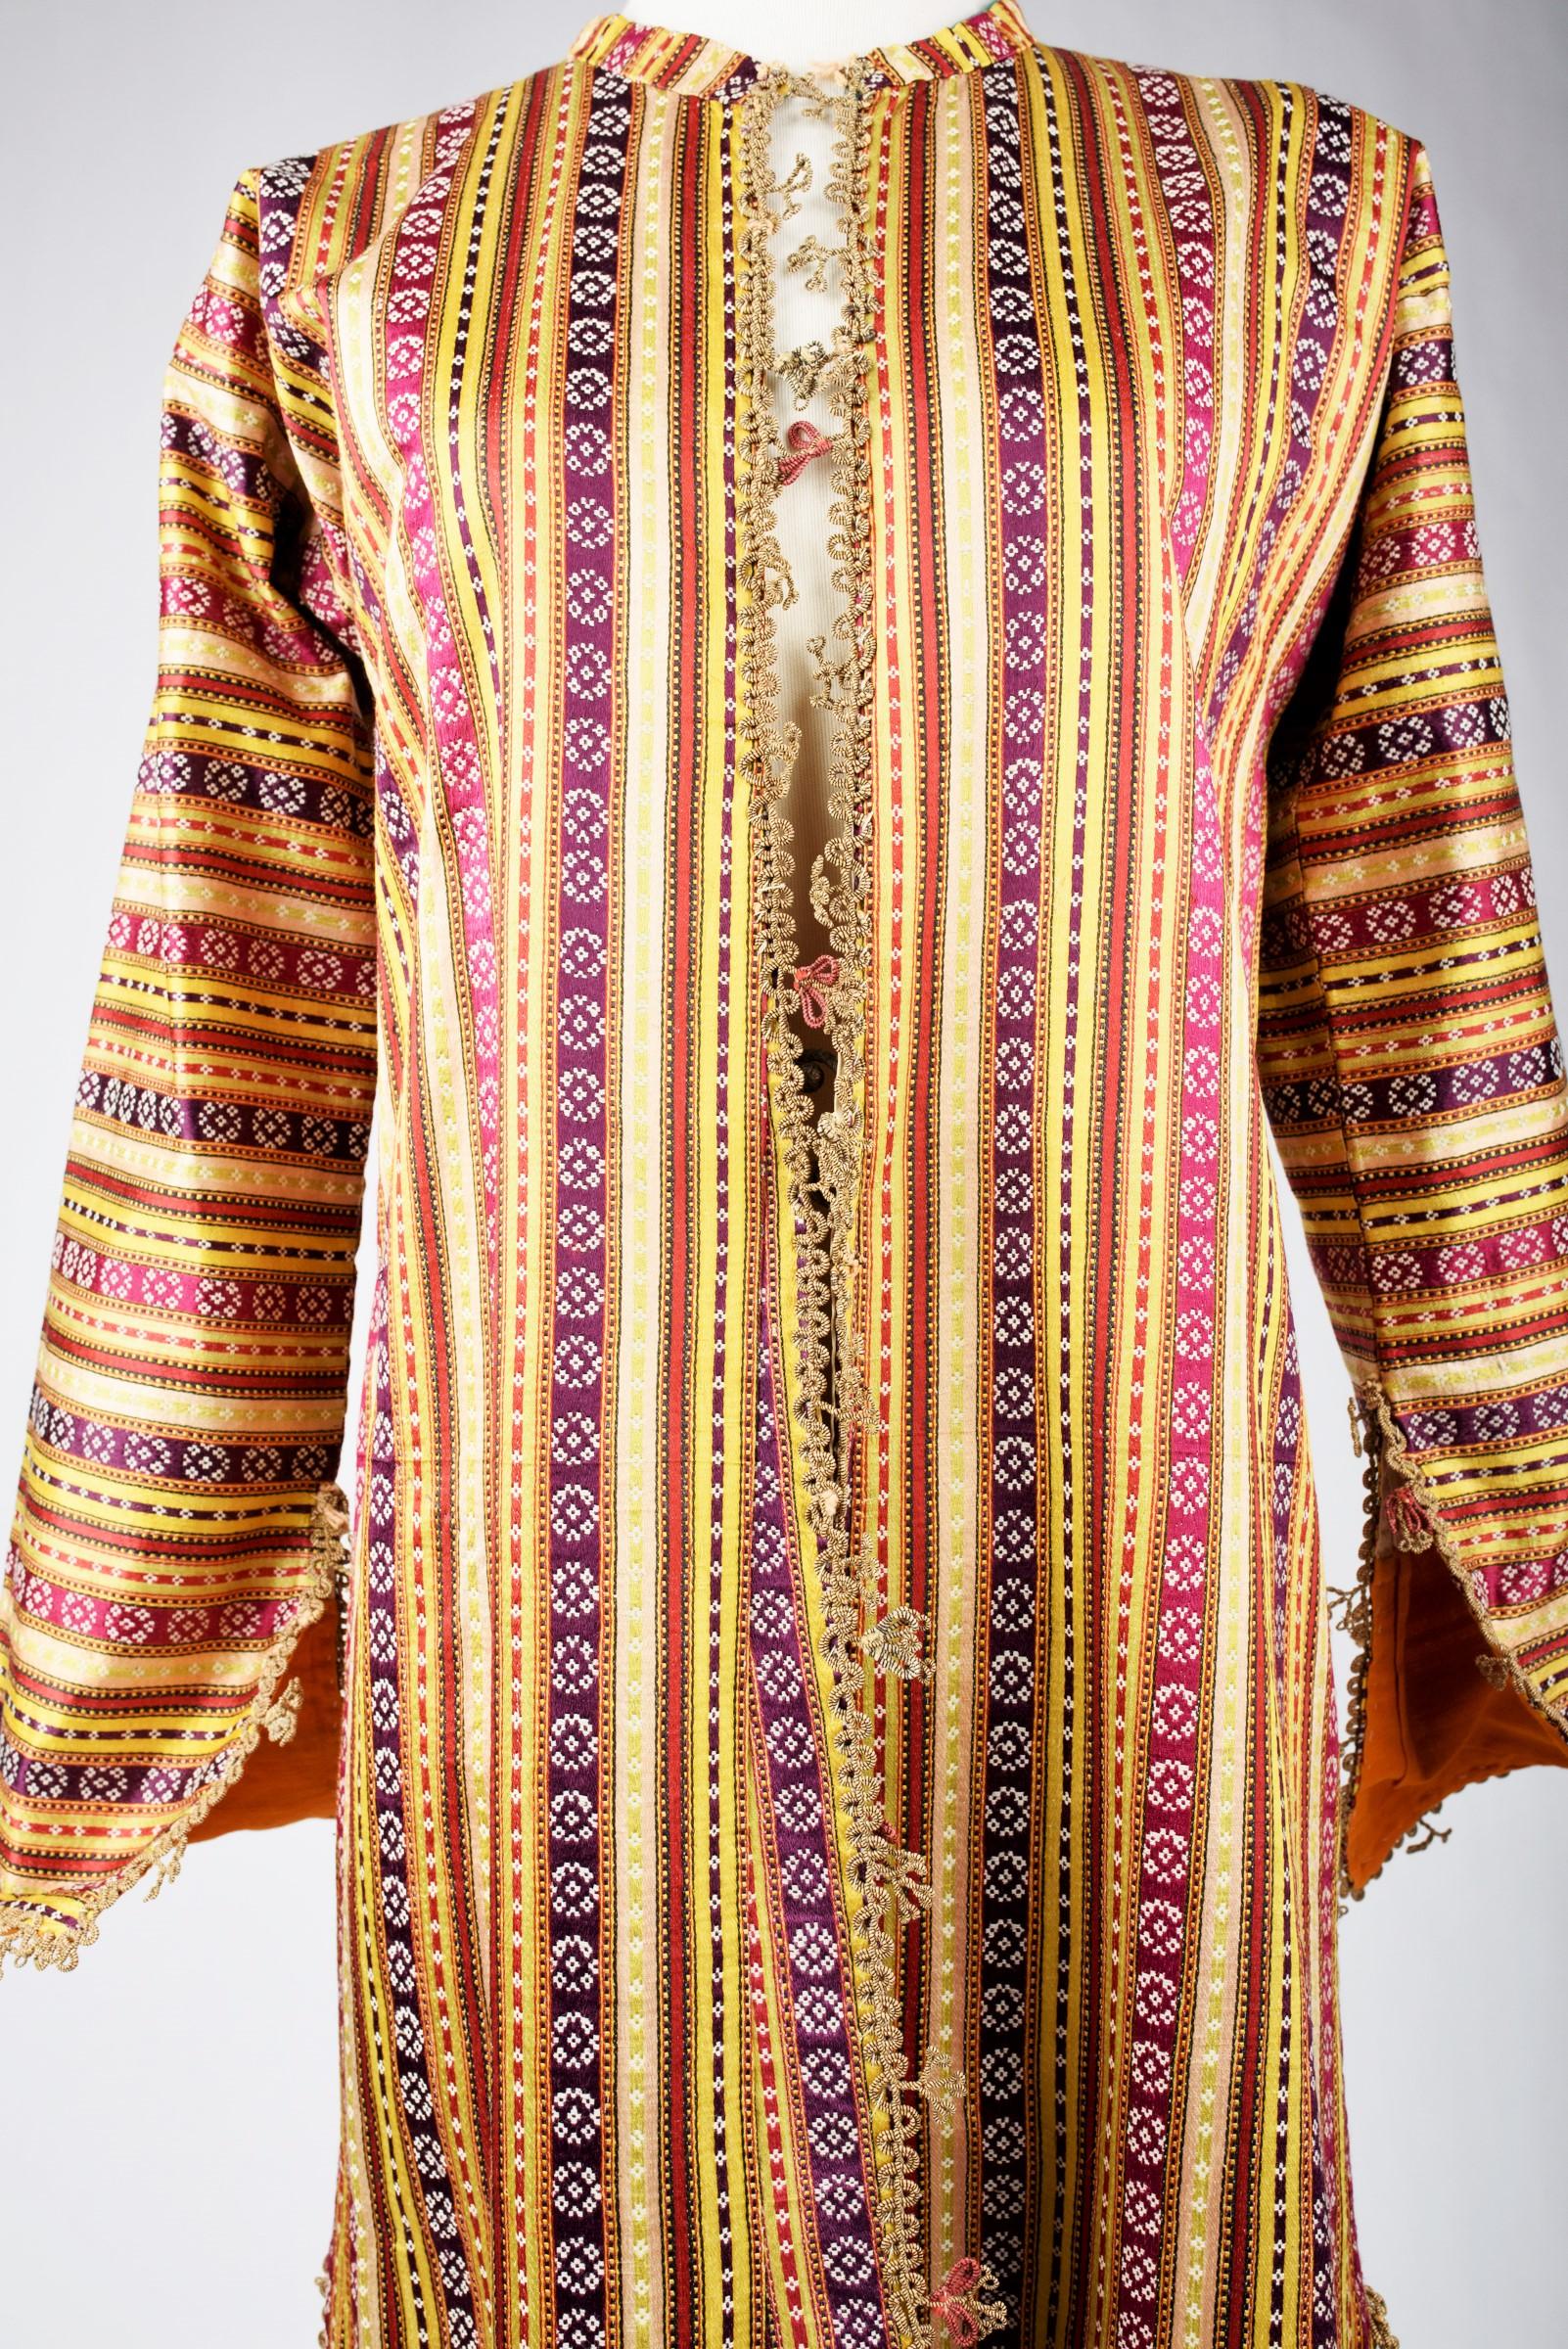 Circa 1900-1930
Ottoman Empire

Long ceremonial coat, kaftan or Entari in silk and cotton satin with fine stripes drawn with rosettes. Crew neck cut, long sleeves with slits at the wrists and two side slits, fully lined with crests of golden blade